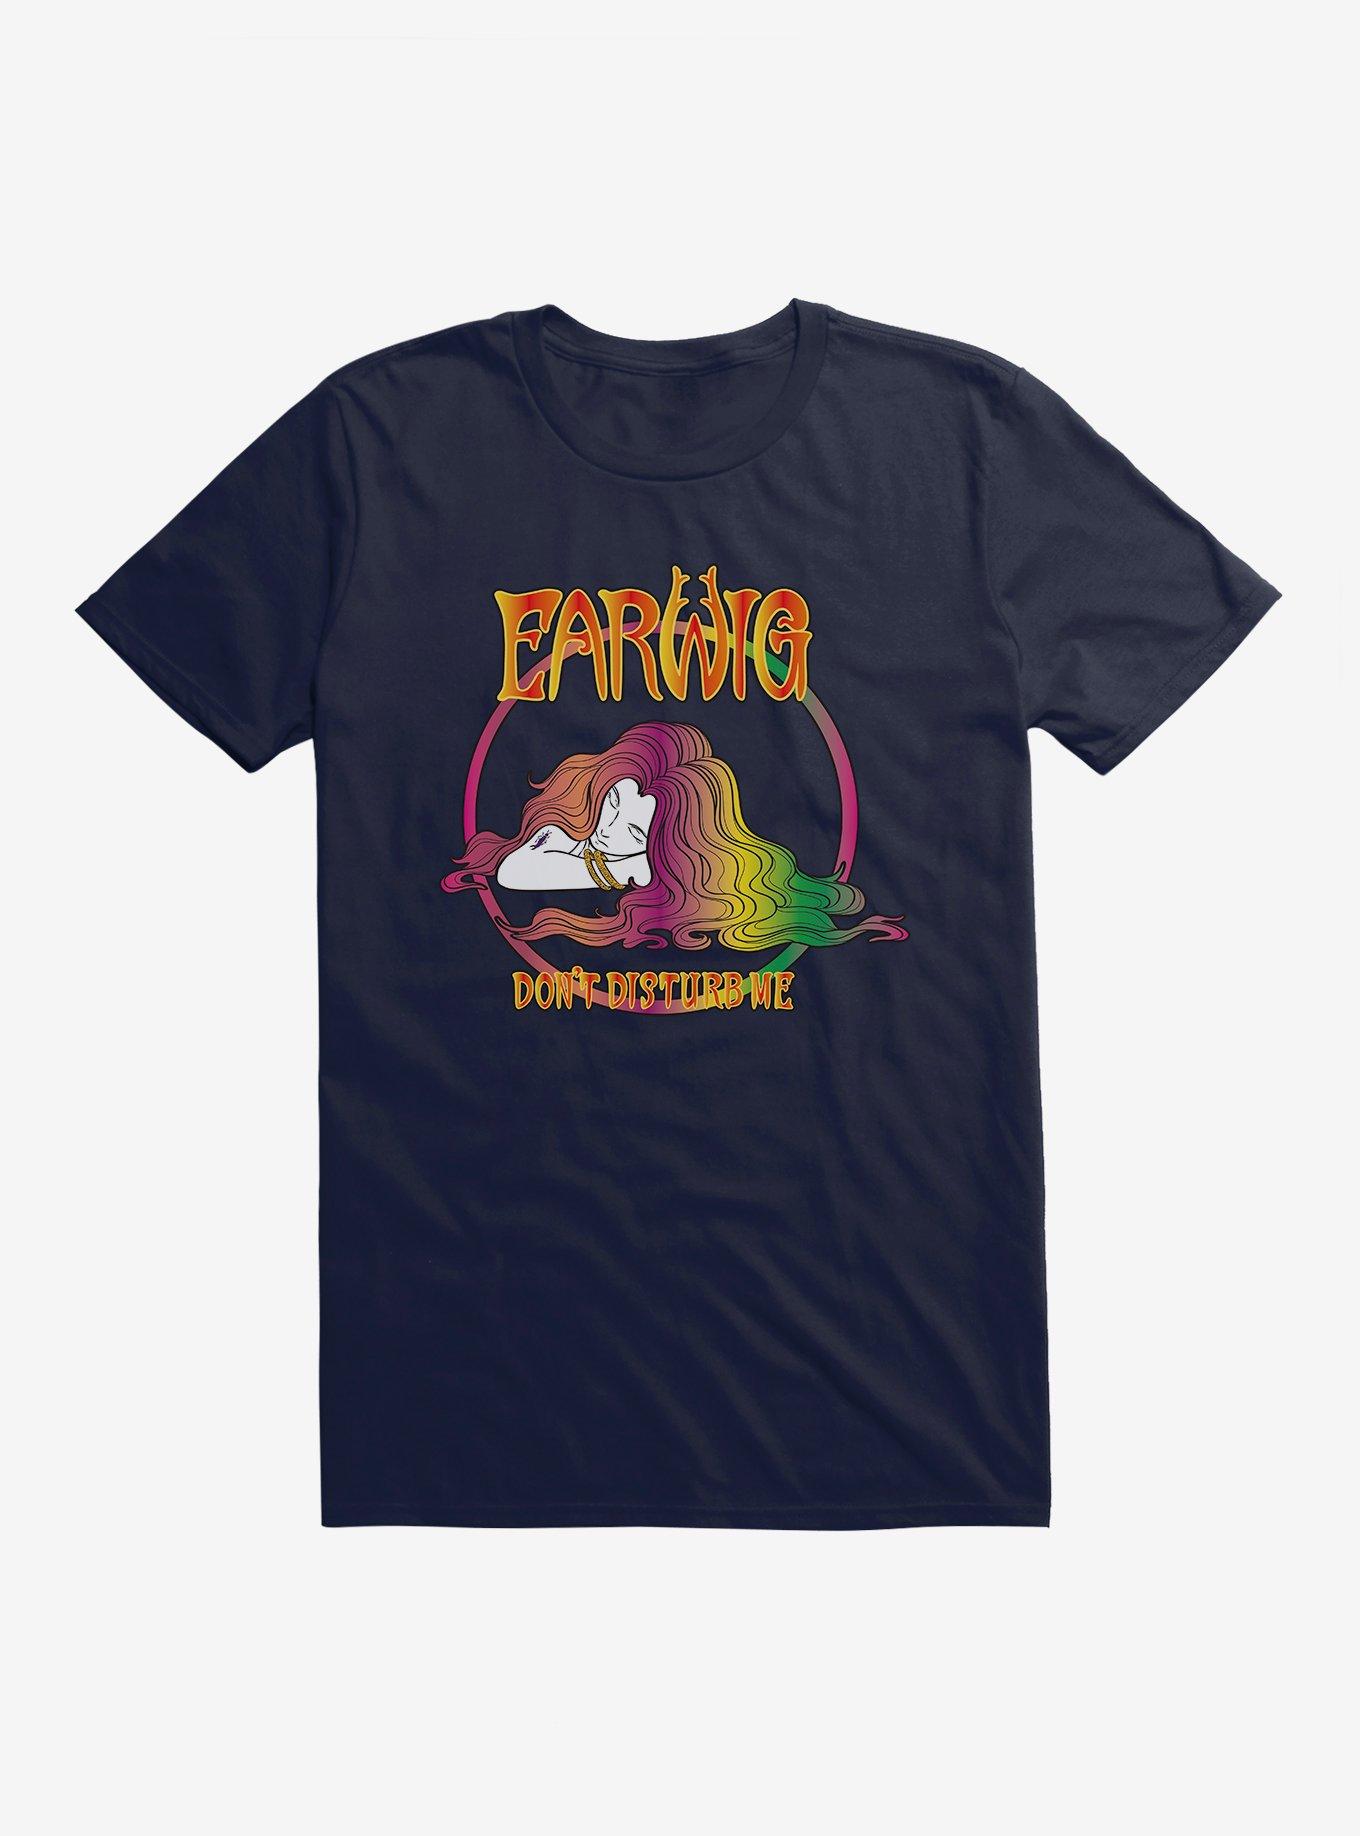 Studio Ghibli Earwig And The Witch Don't Disturb Me T-Shirt, NAVY, hi-res